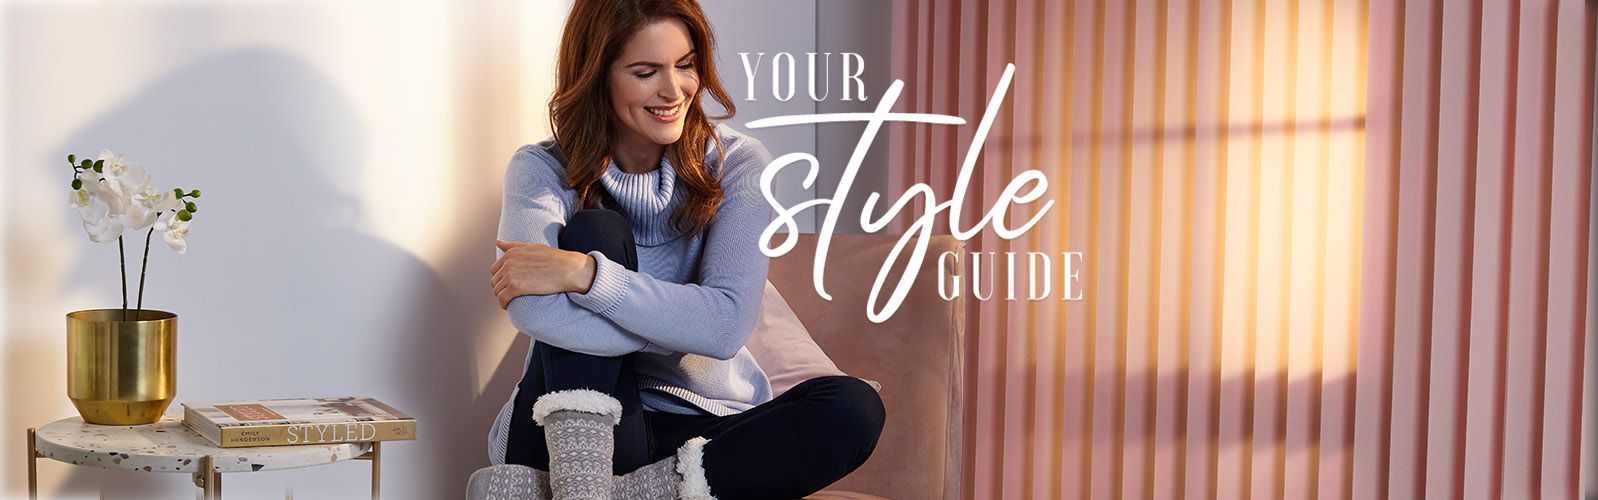 Your Style Guide - The Warm Up